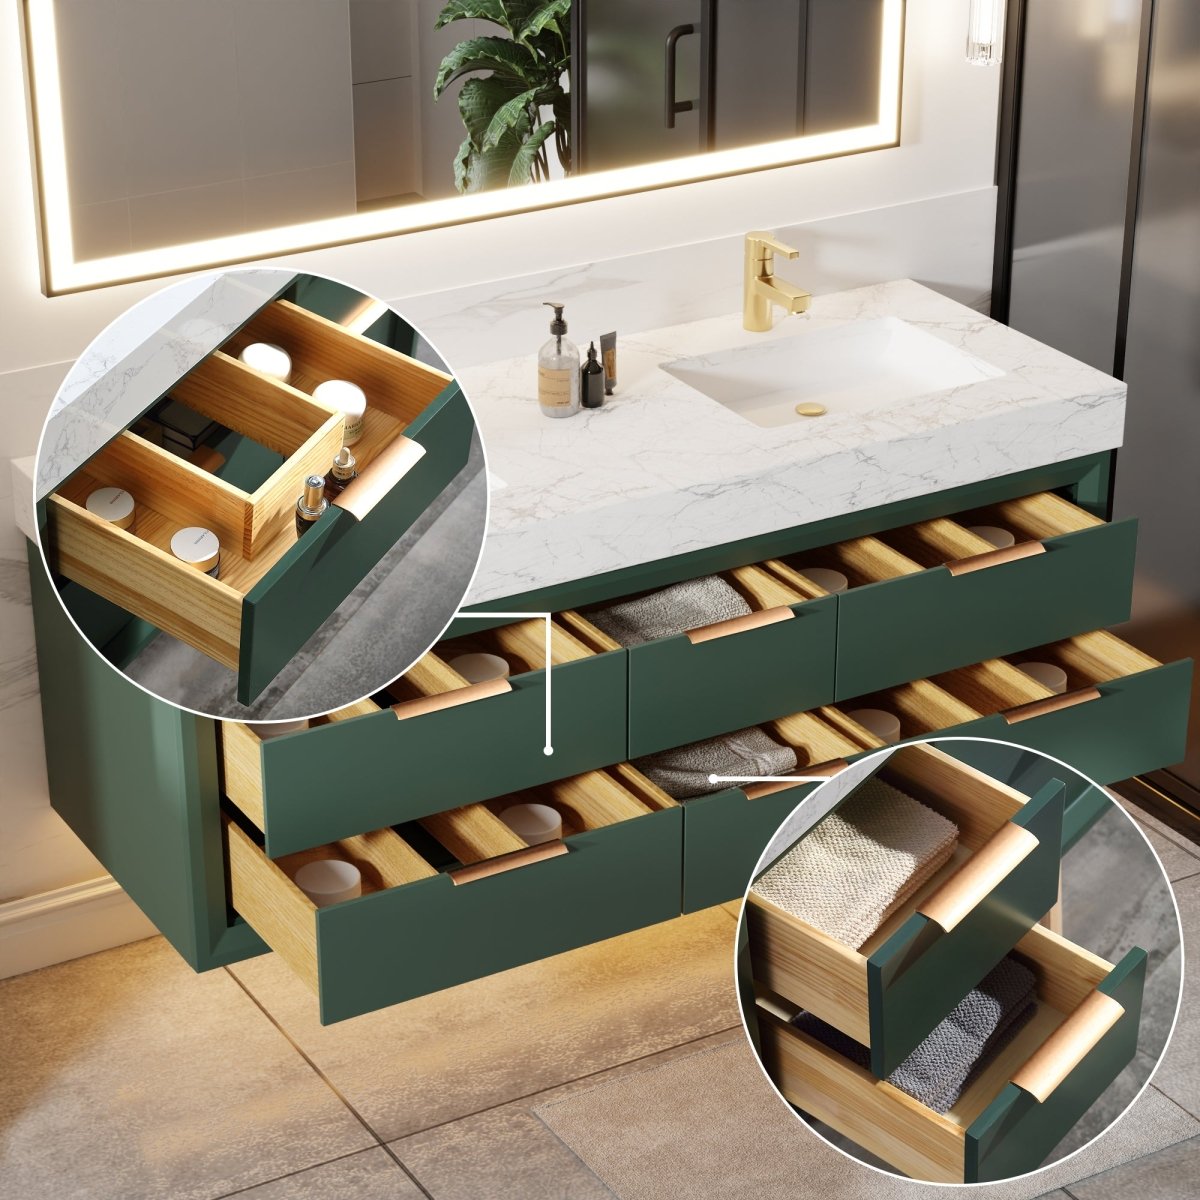 Glam 60" Modern Floating Rubberwood Bathroom Vanity Cabinet with Lights and Stone Slab Countertop in Green